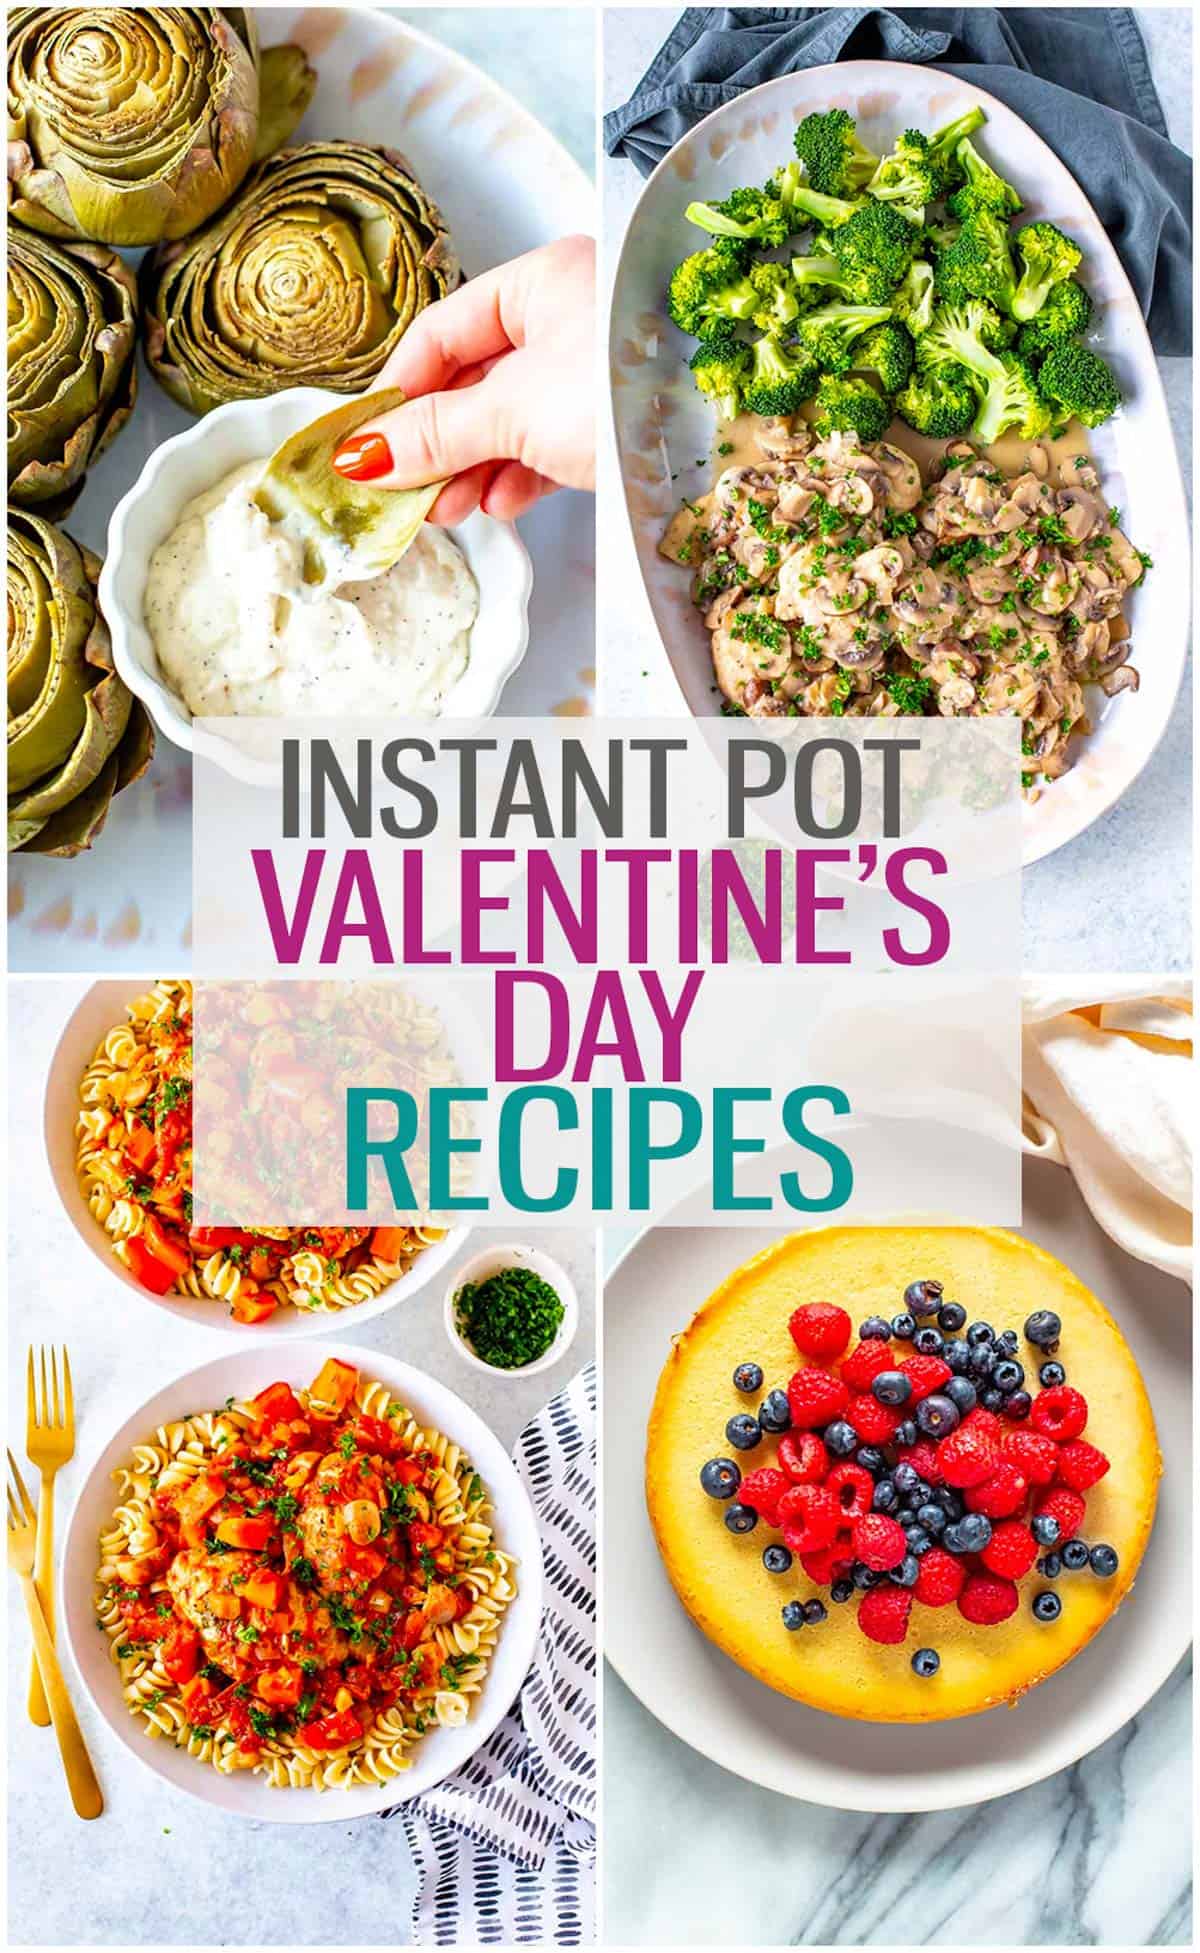 A collage of four romantic recipes with the text "Instant Pot Valentine's Day Recipes" layered over top.